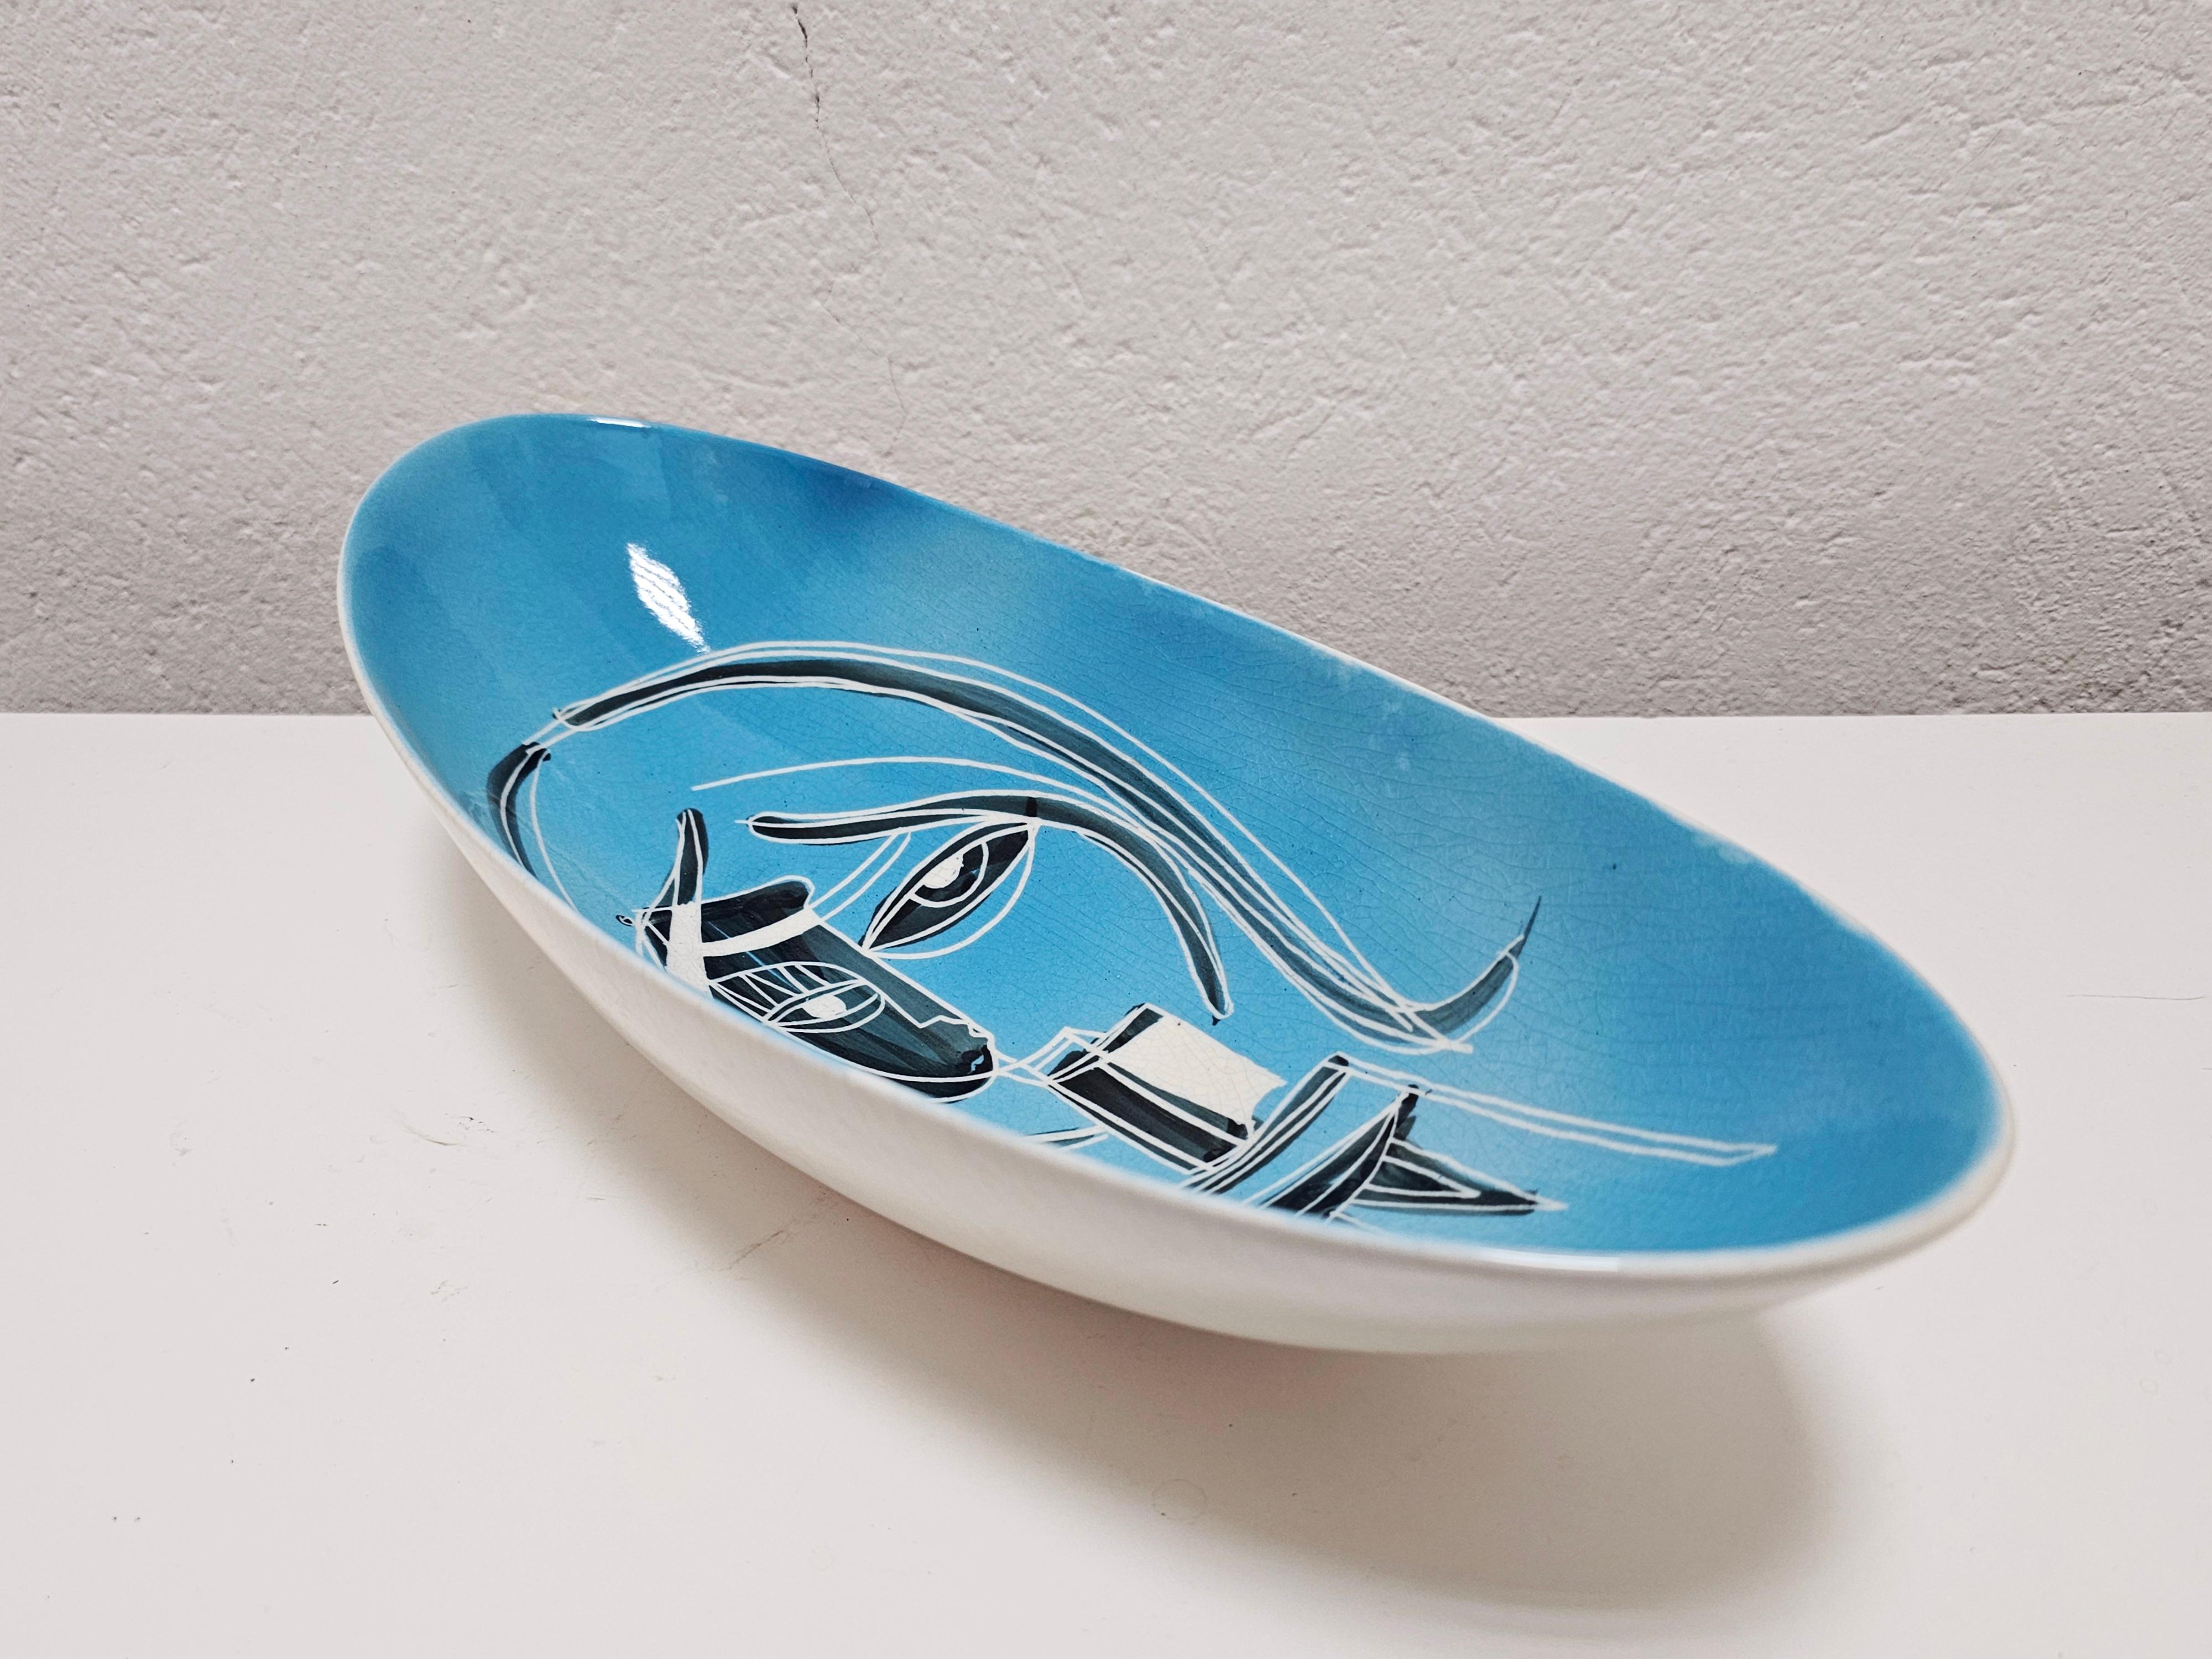 This outstanding fruit bowl was made in Yugoslavia in 1970s, by Jugokeramika, the largest and most prominent ceramic factory in the region. The fruit bowl is done in modernist style and it features a print or illustration that was inspired by the